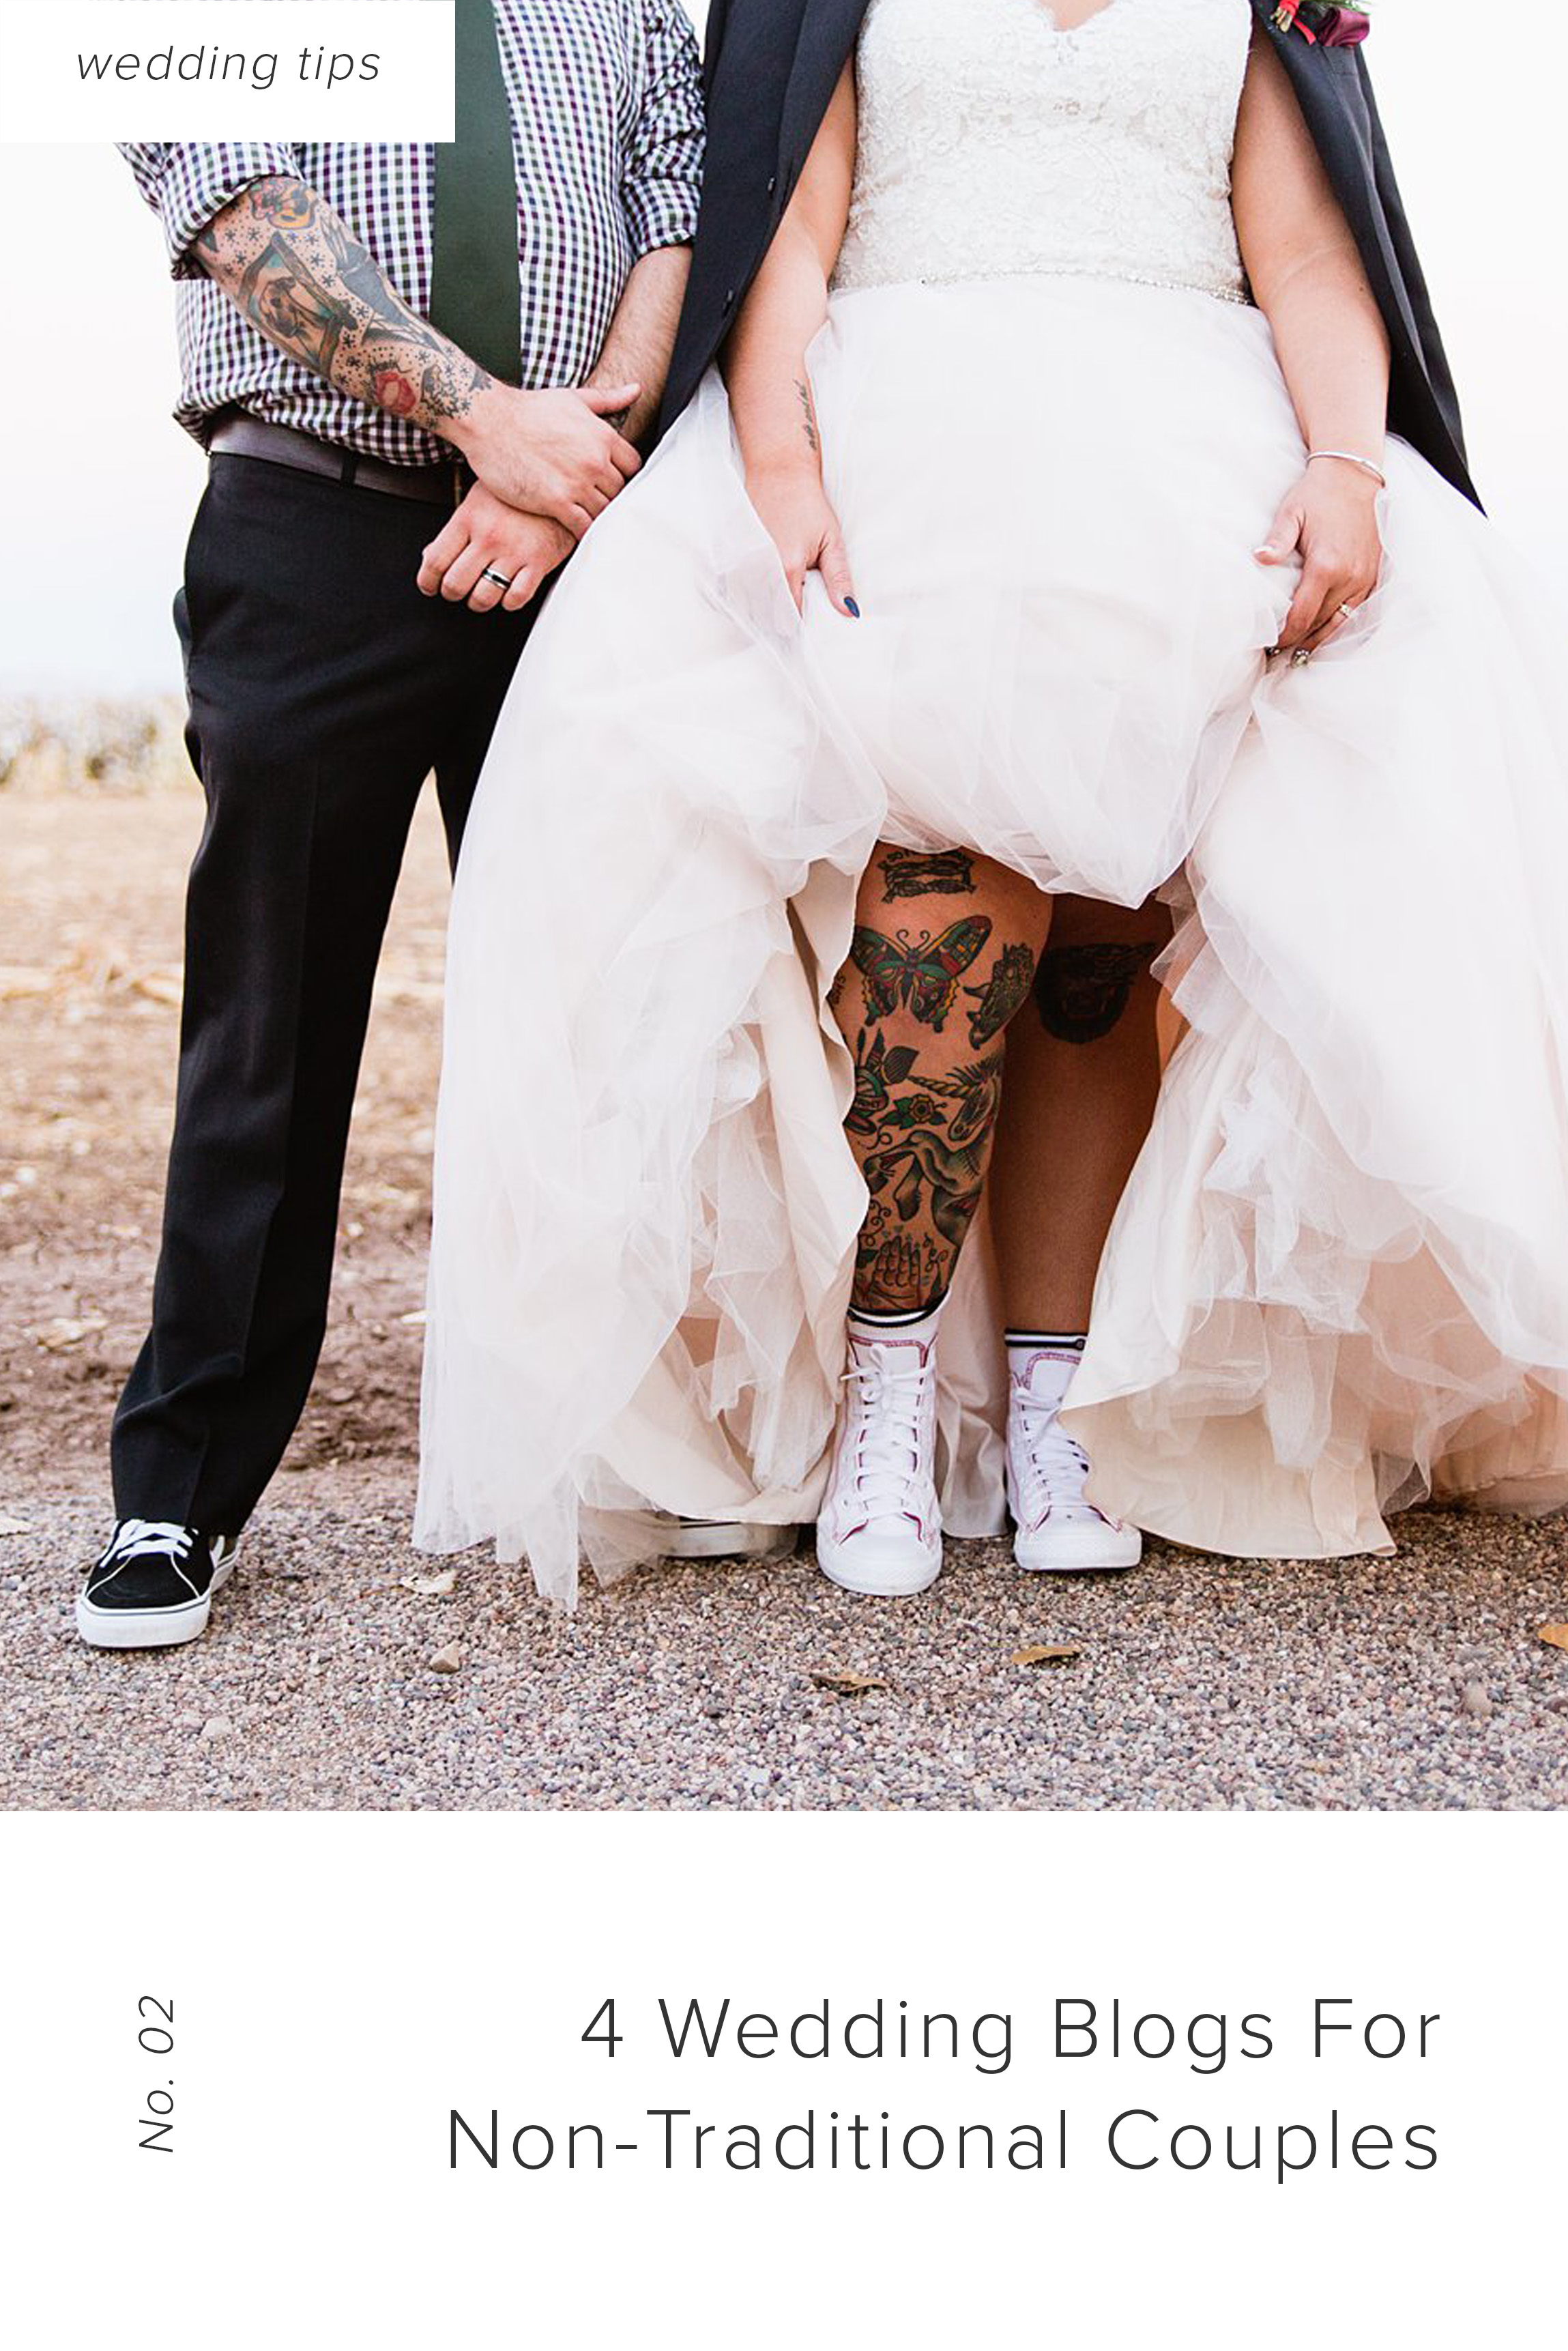 4 wedding blogs for non-traditional and alternative couples by professional Phoenix wedding photographer PMA Photography.